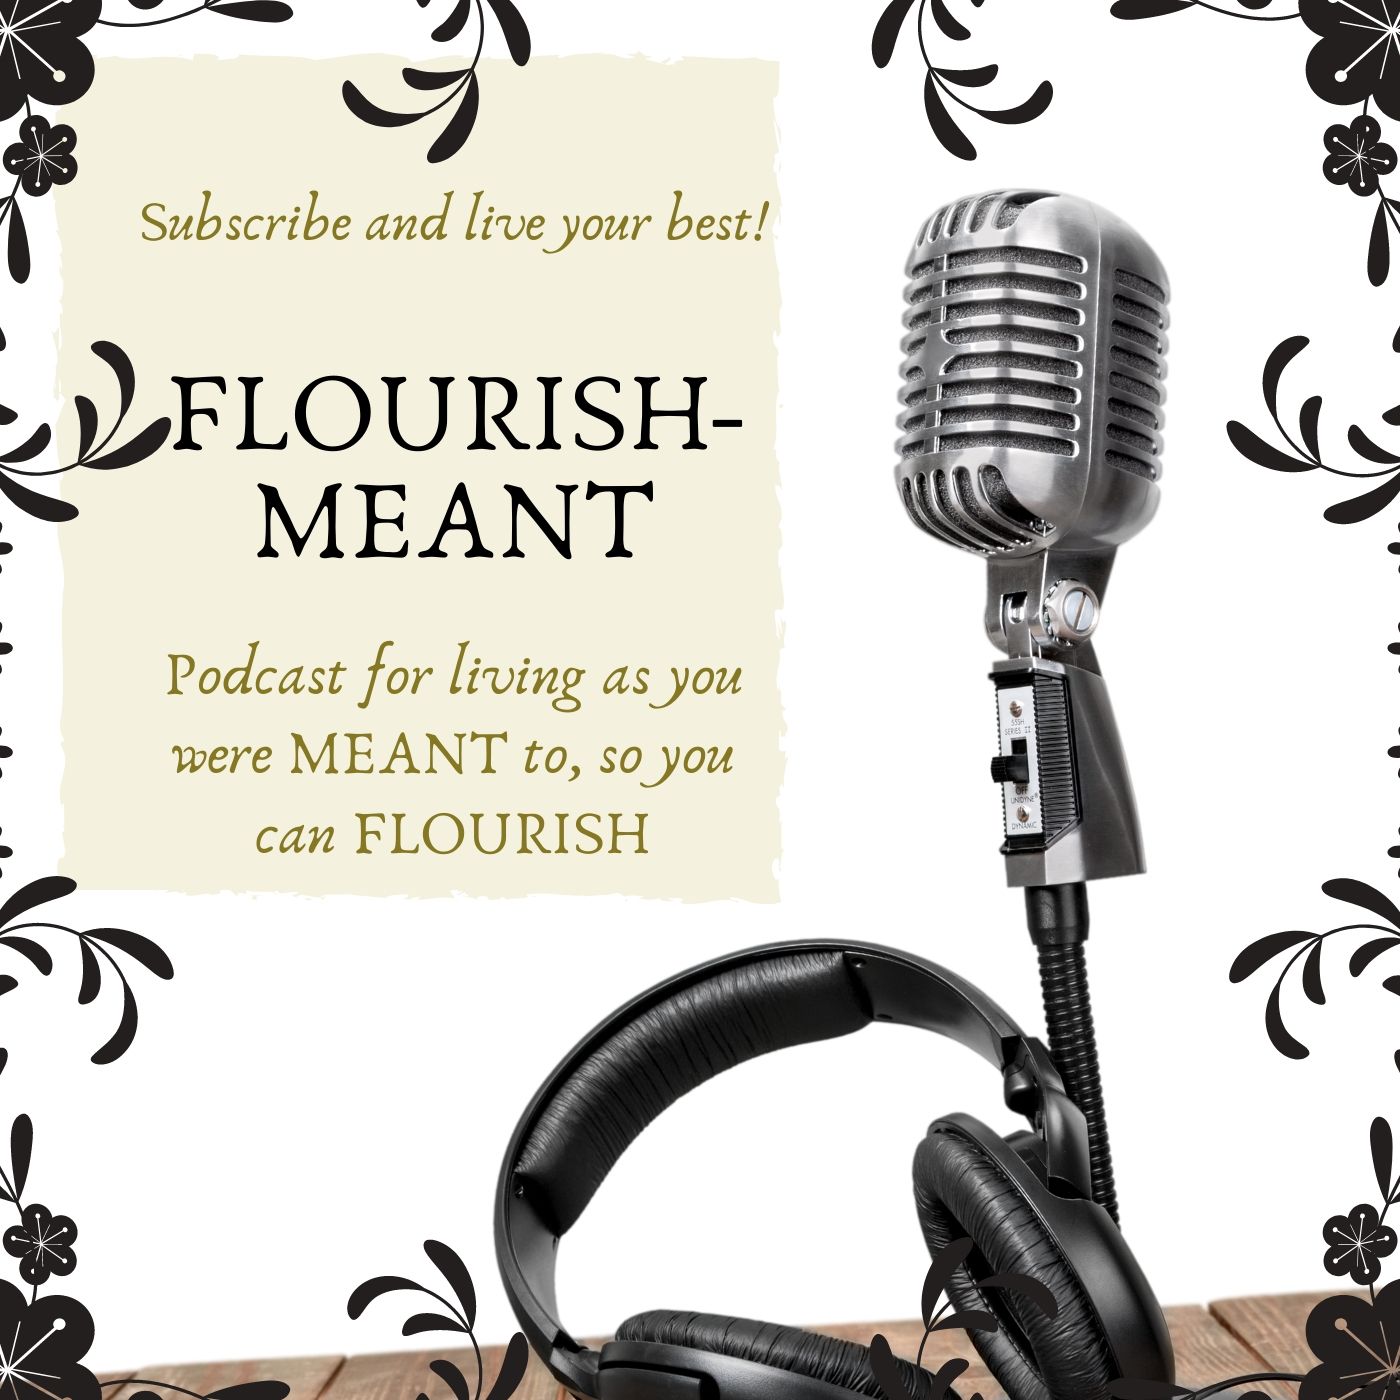 Flourish-meant podcast for living as you were meant to, so you can flourish best podcasts for christian women